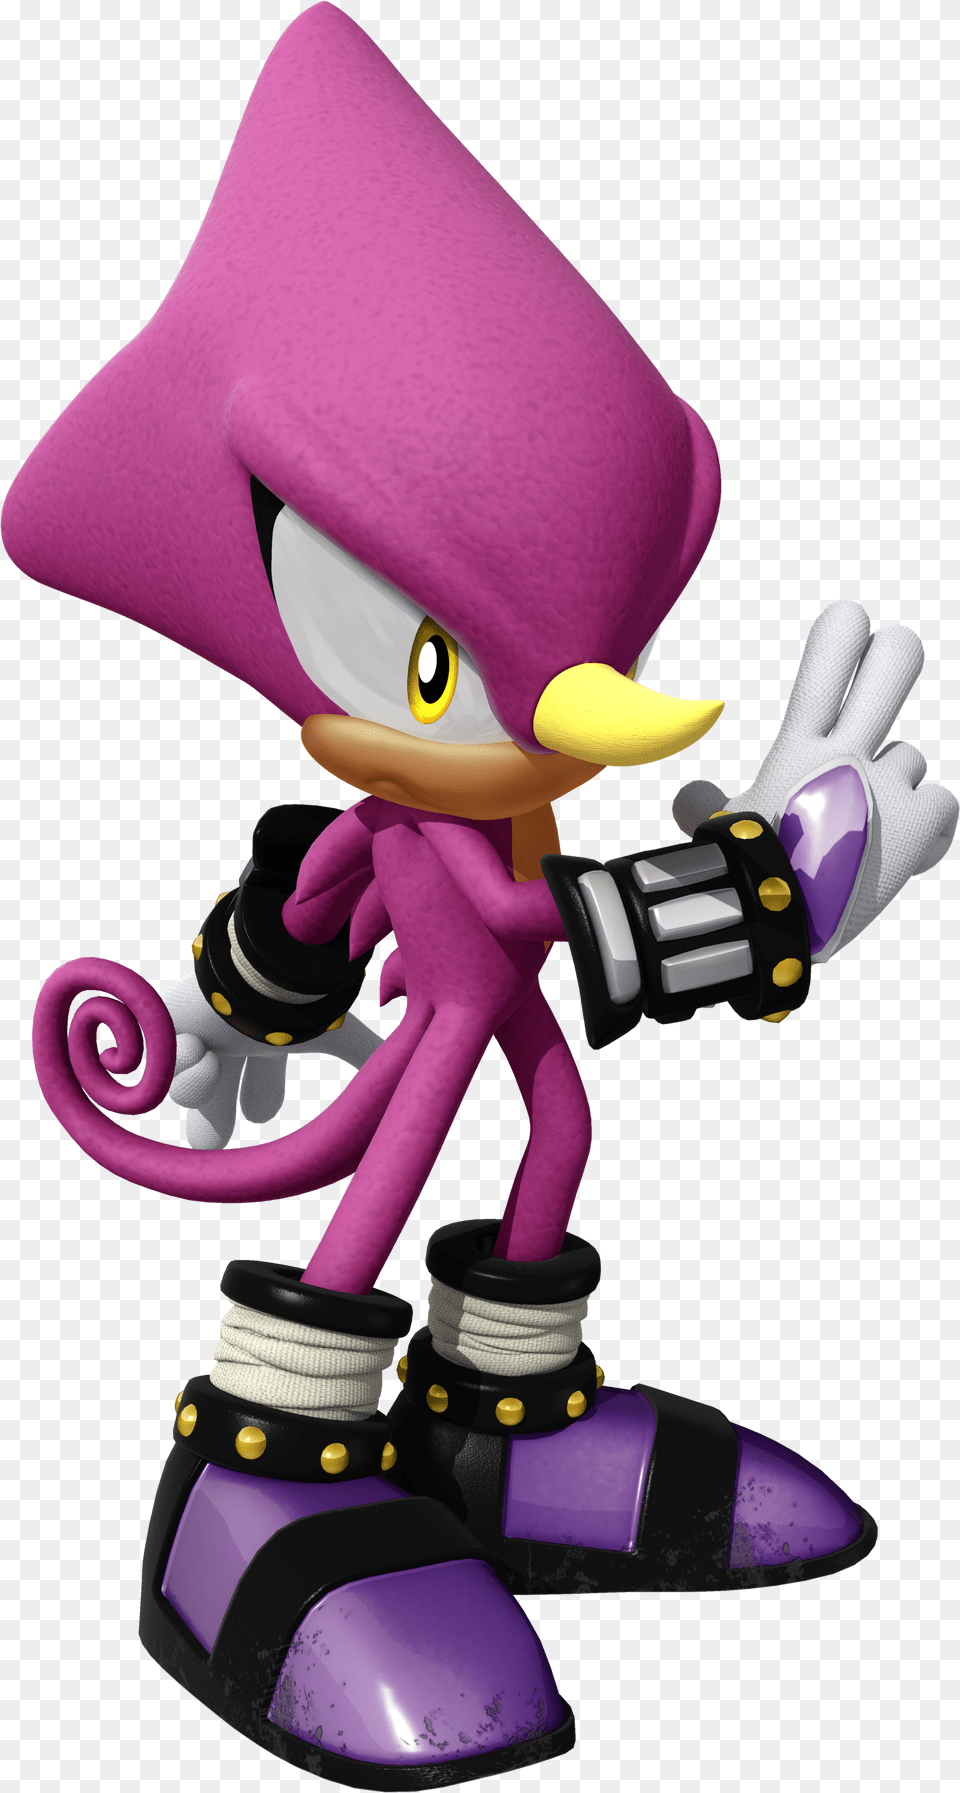 Espio The Chameleon 2000, Purple, Toy, Clothing, Glove Free Png Download